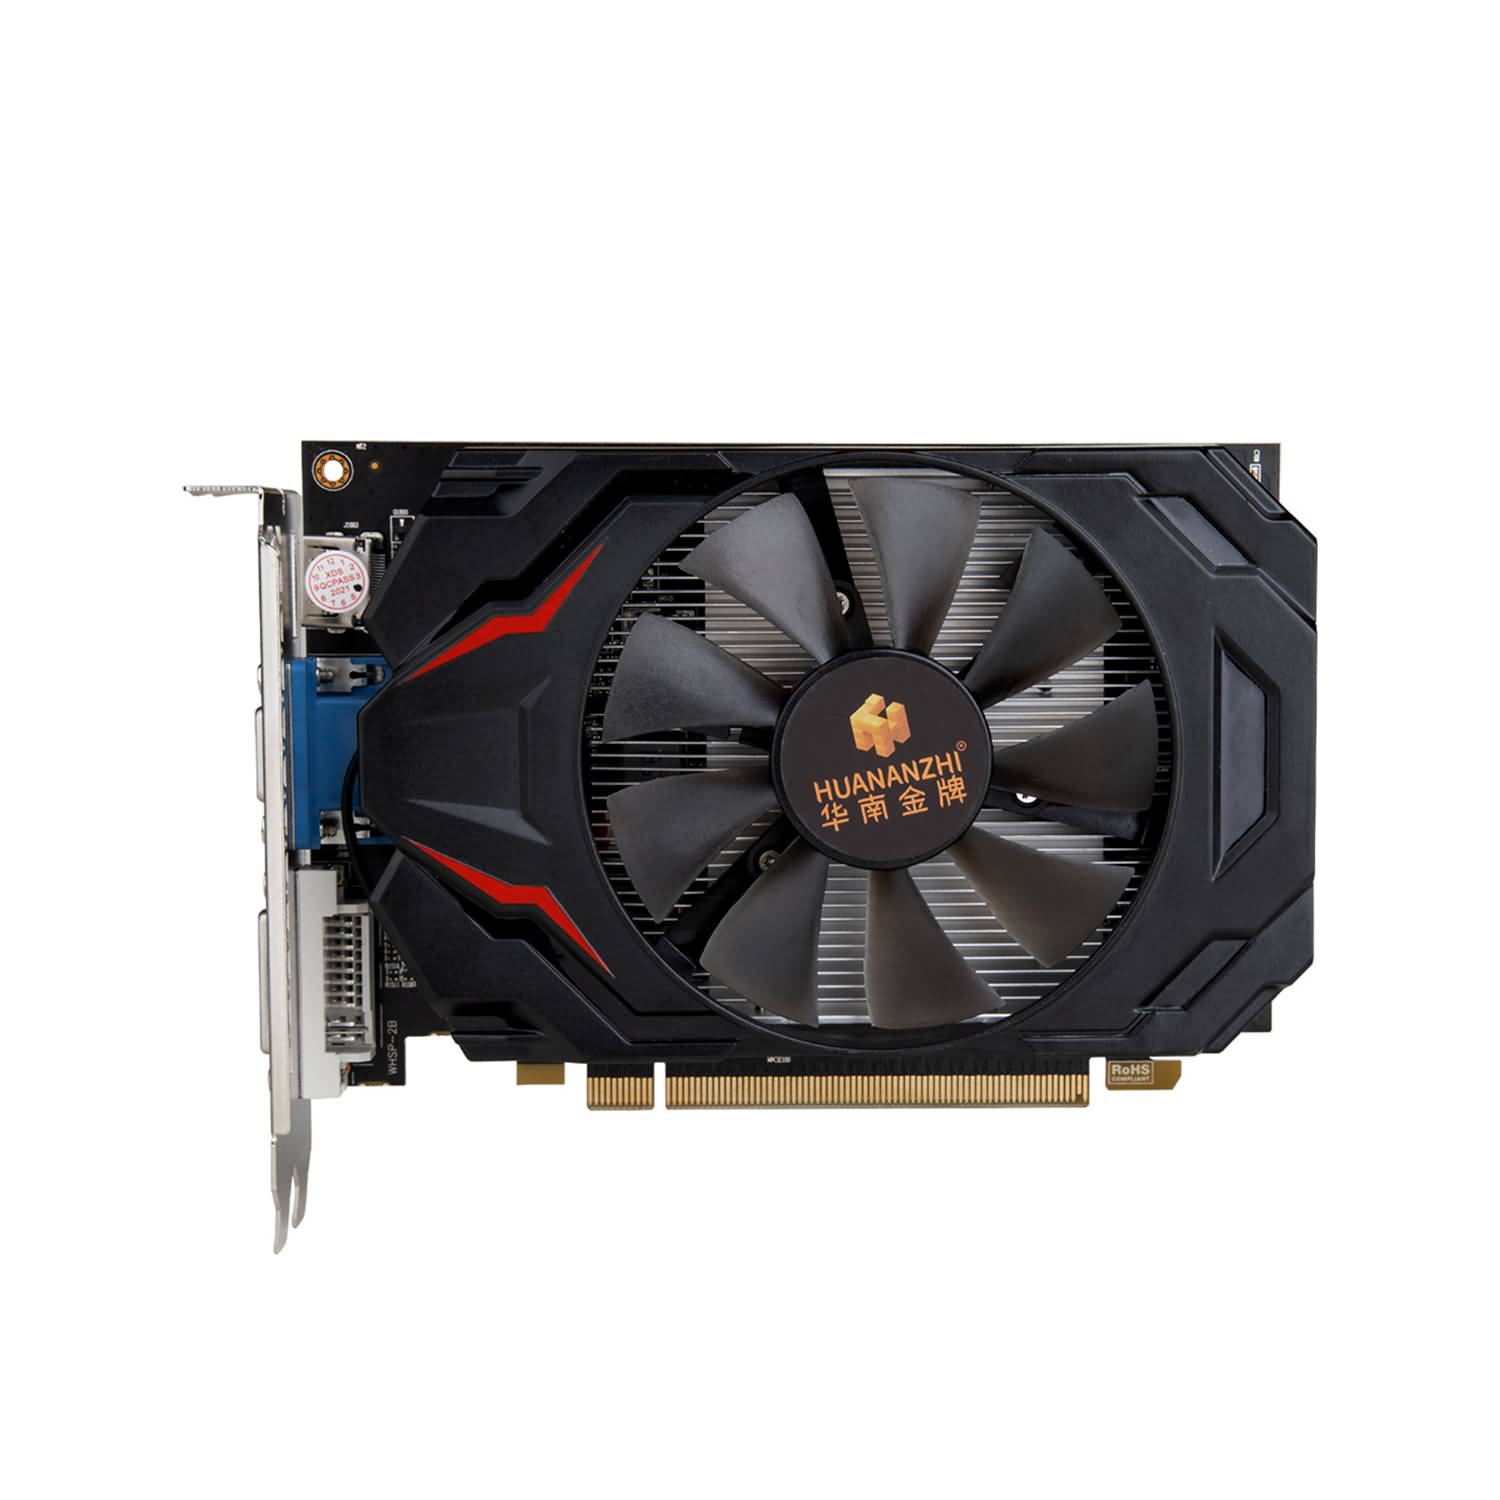 Download Huananzhi R7 350 2G Graphics Card Free